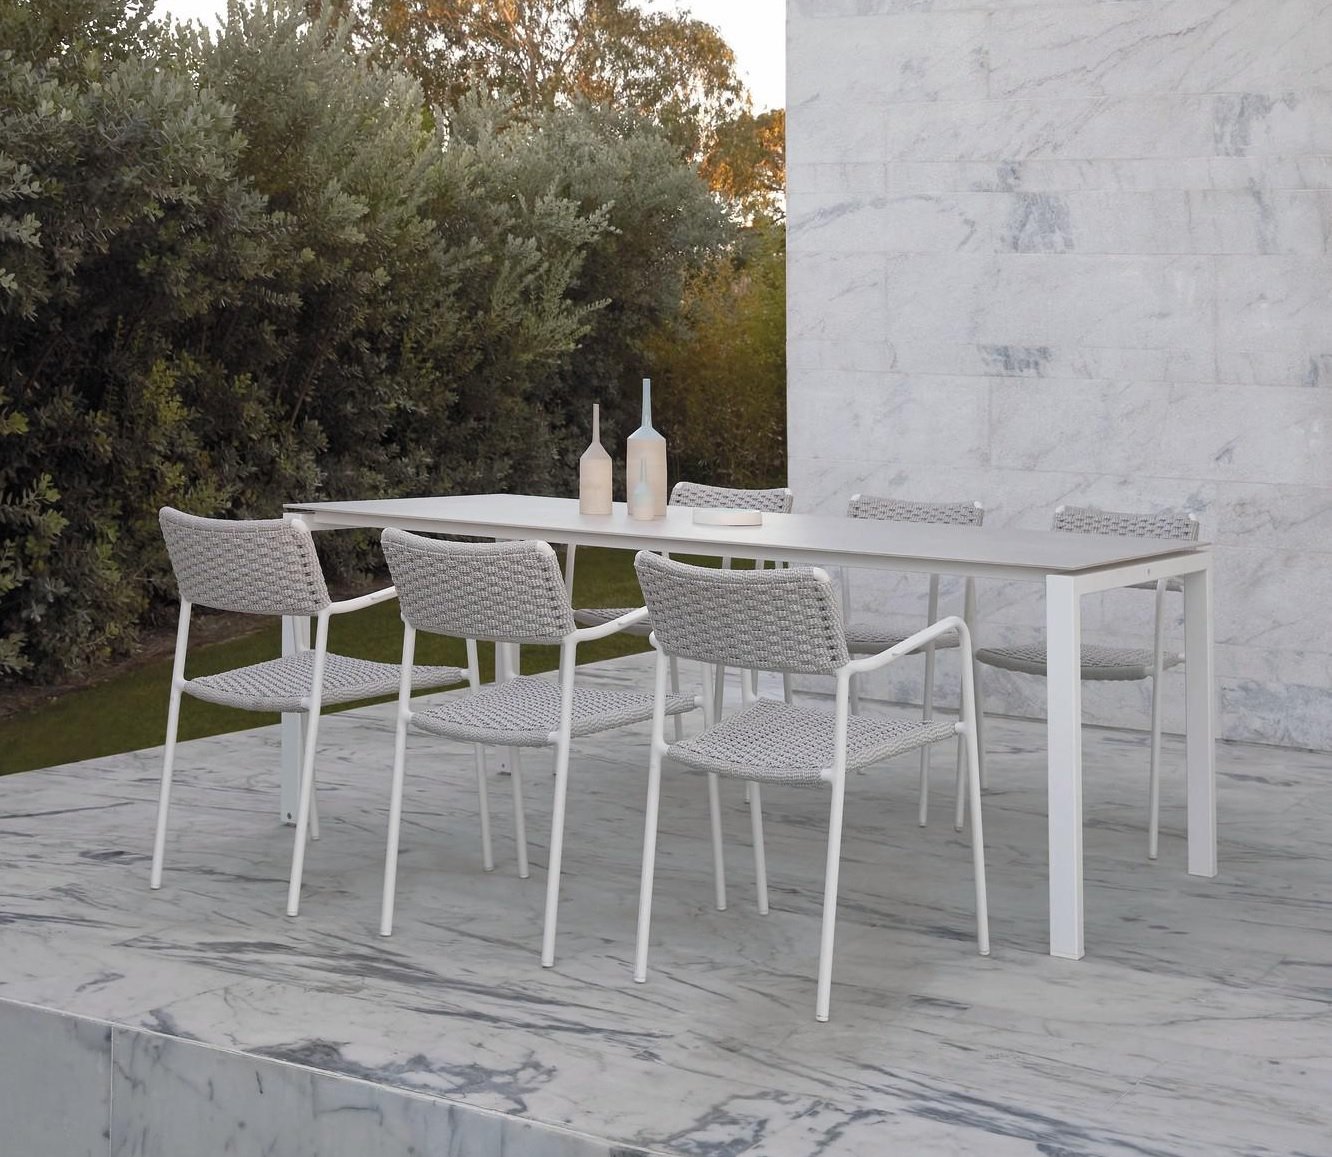 Trento Dining Table from Manutti, designed by Stephane De Winter